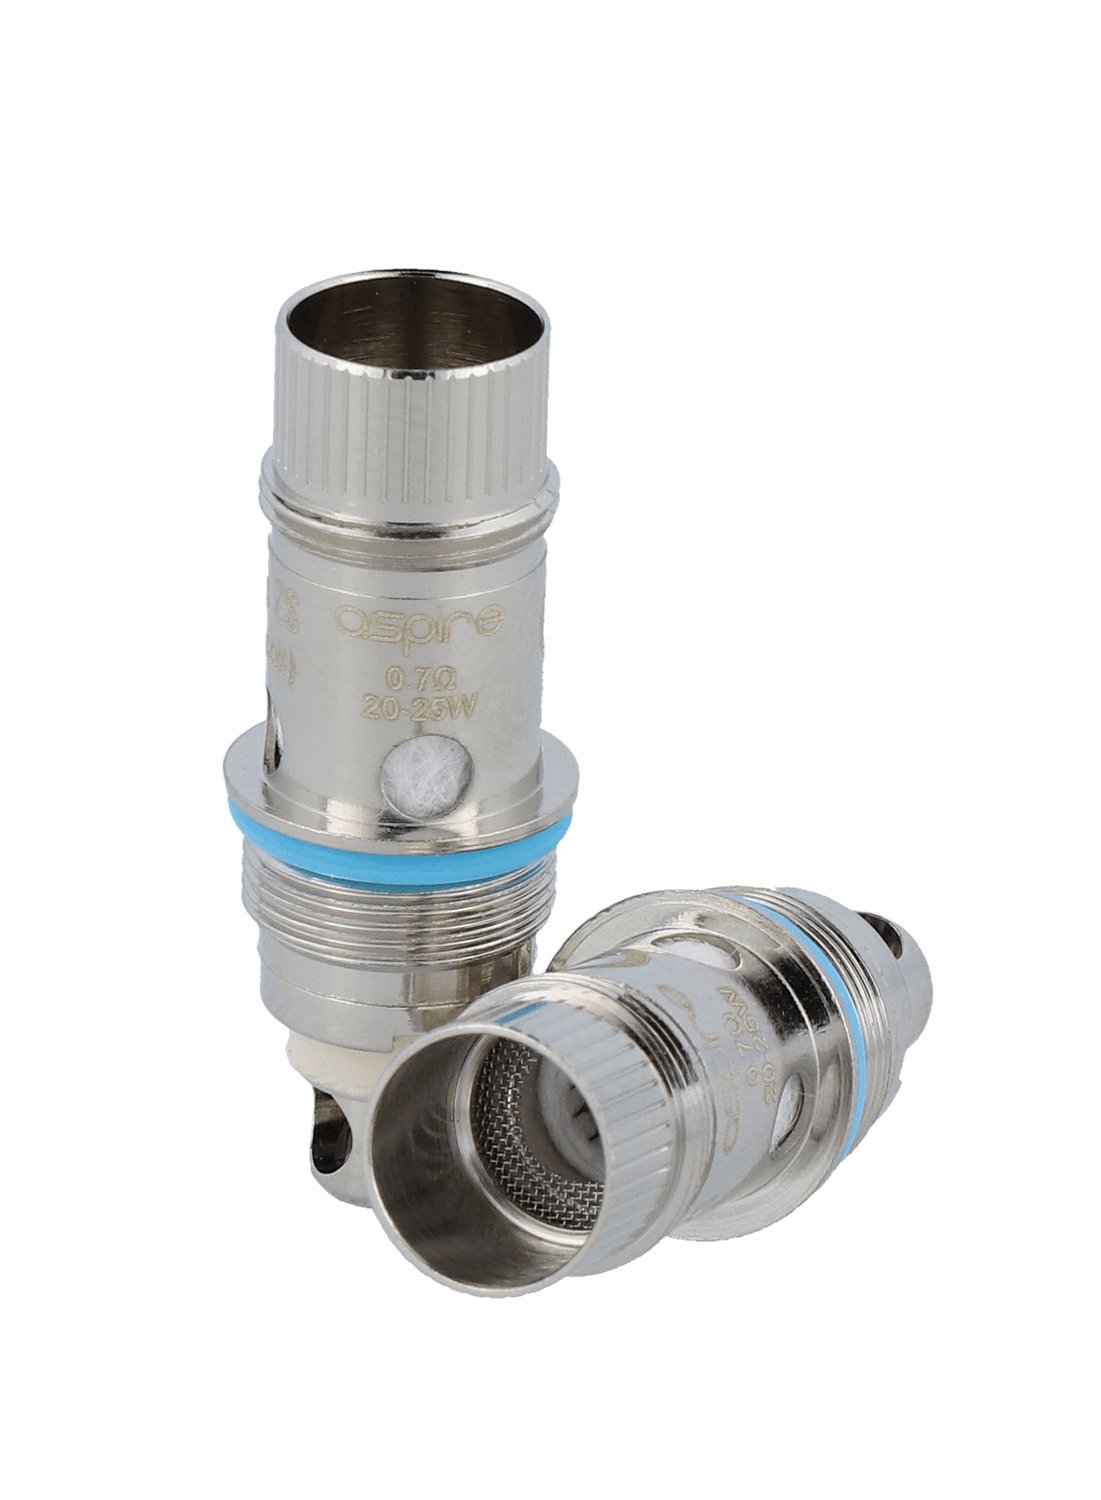 Aspire - Nautilus 2S - Mesh Heads 0,7 Ohm (5 Stück pro Packung) - 1er Packung 0,7 Ohm - Vapes4you